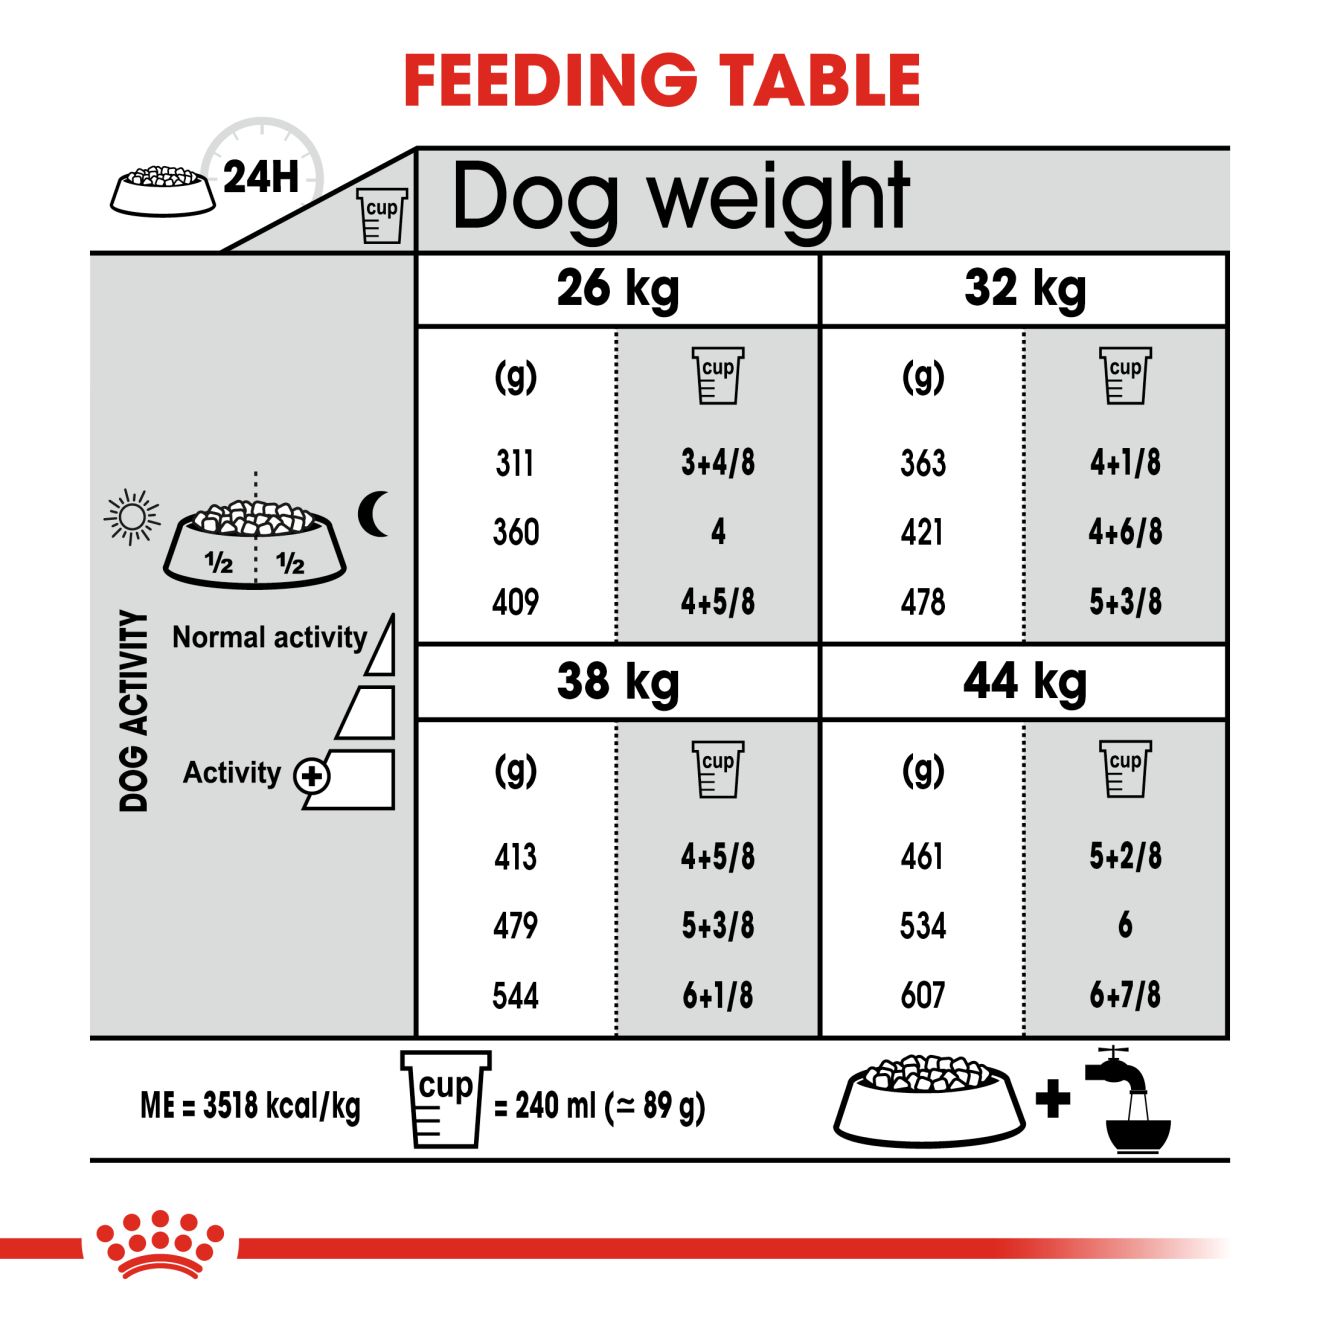 Royal Canin Maxi Joint Care 10KG